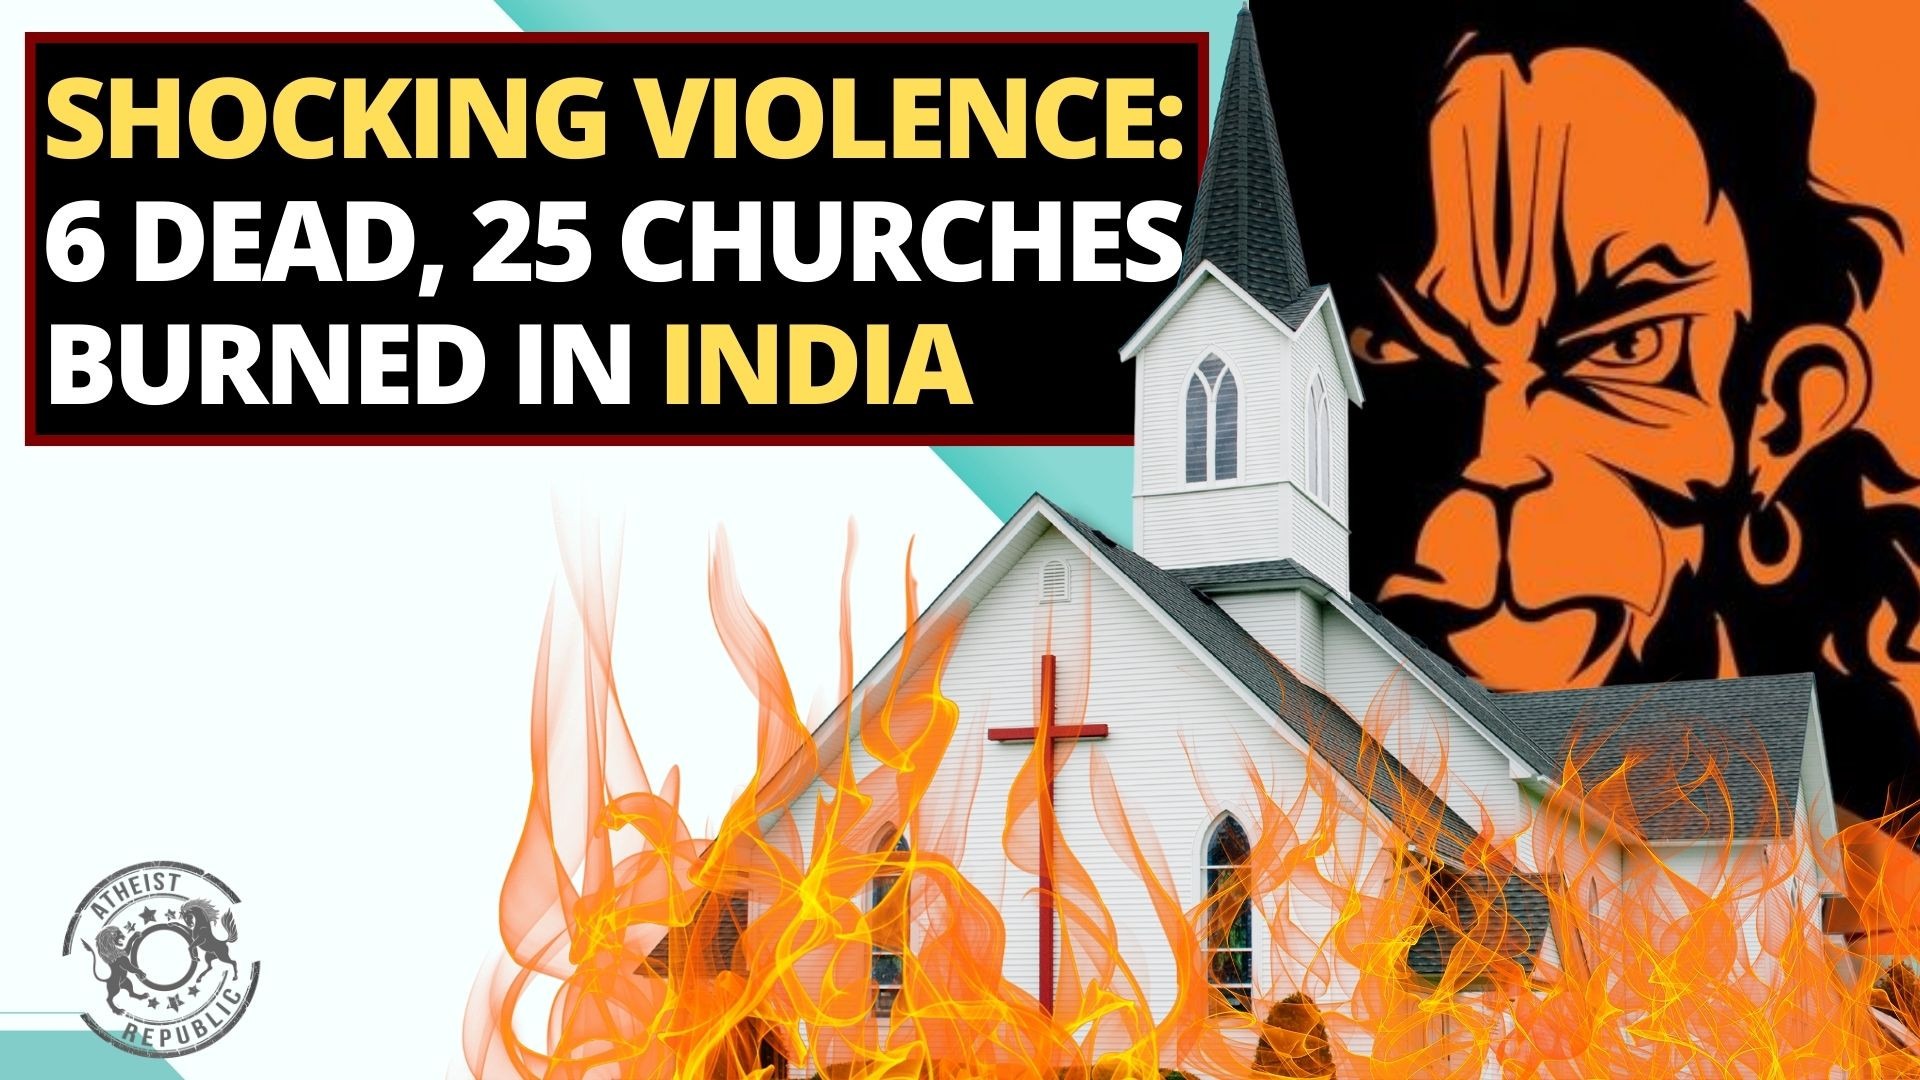 Shocking Violence 6 Dead, 25 Churches Burned in India